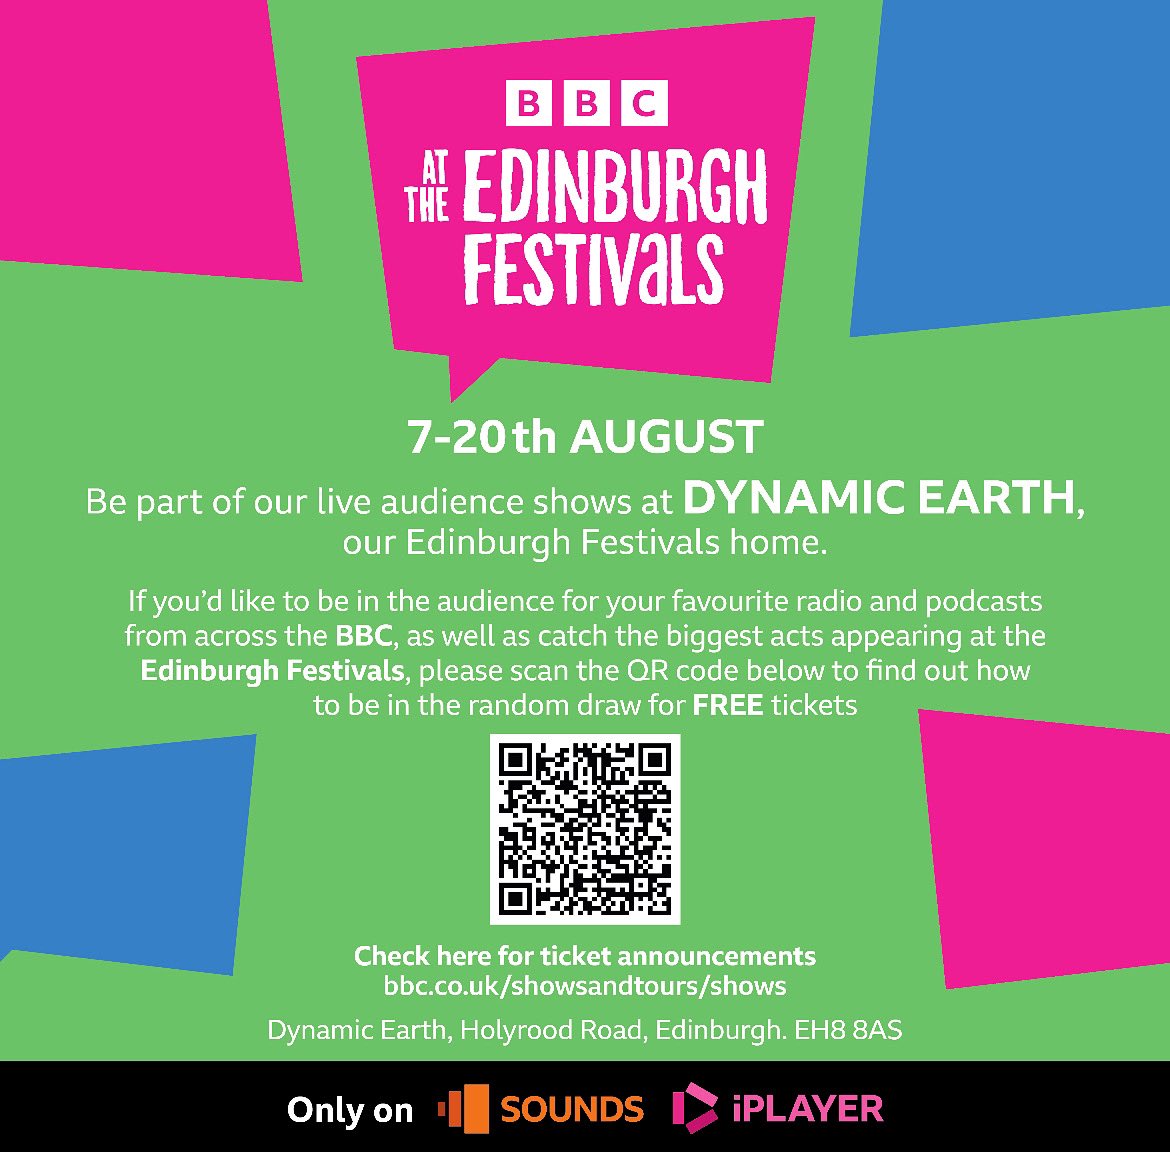 📣📣 We’re back! And we have a new venue this year @ourdynamicearth 7-20 August. Want to join us? Just click here bbc.co.uk/showsandtours/… before midnight on the 23rd of July to register for the random ticket draw.